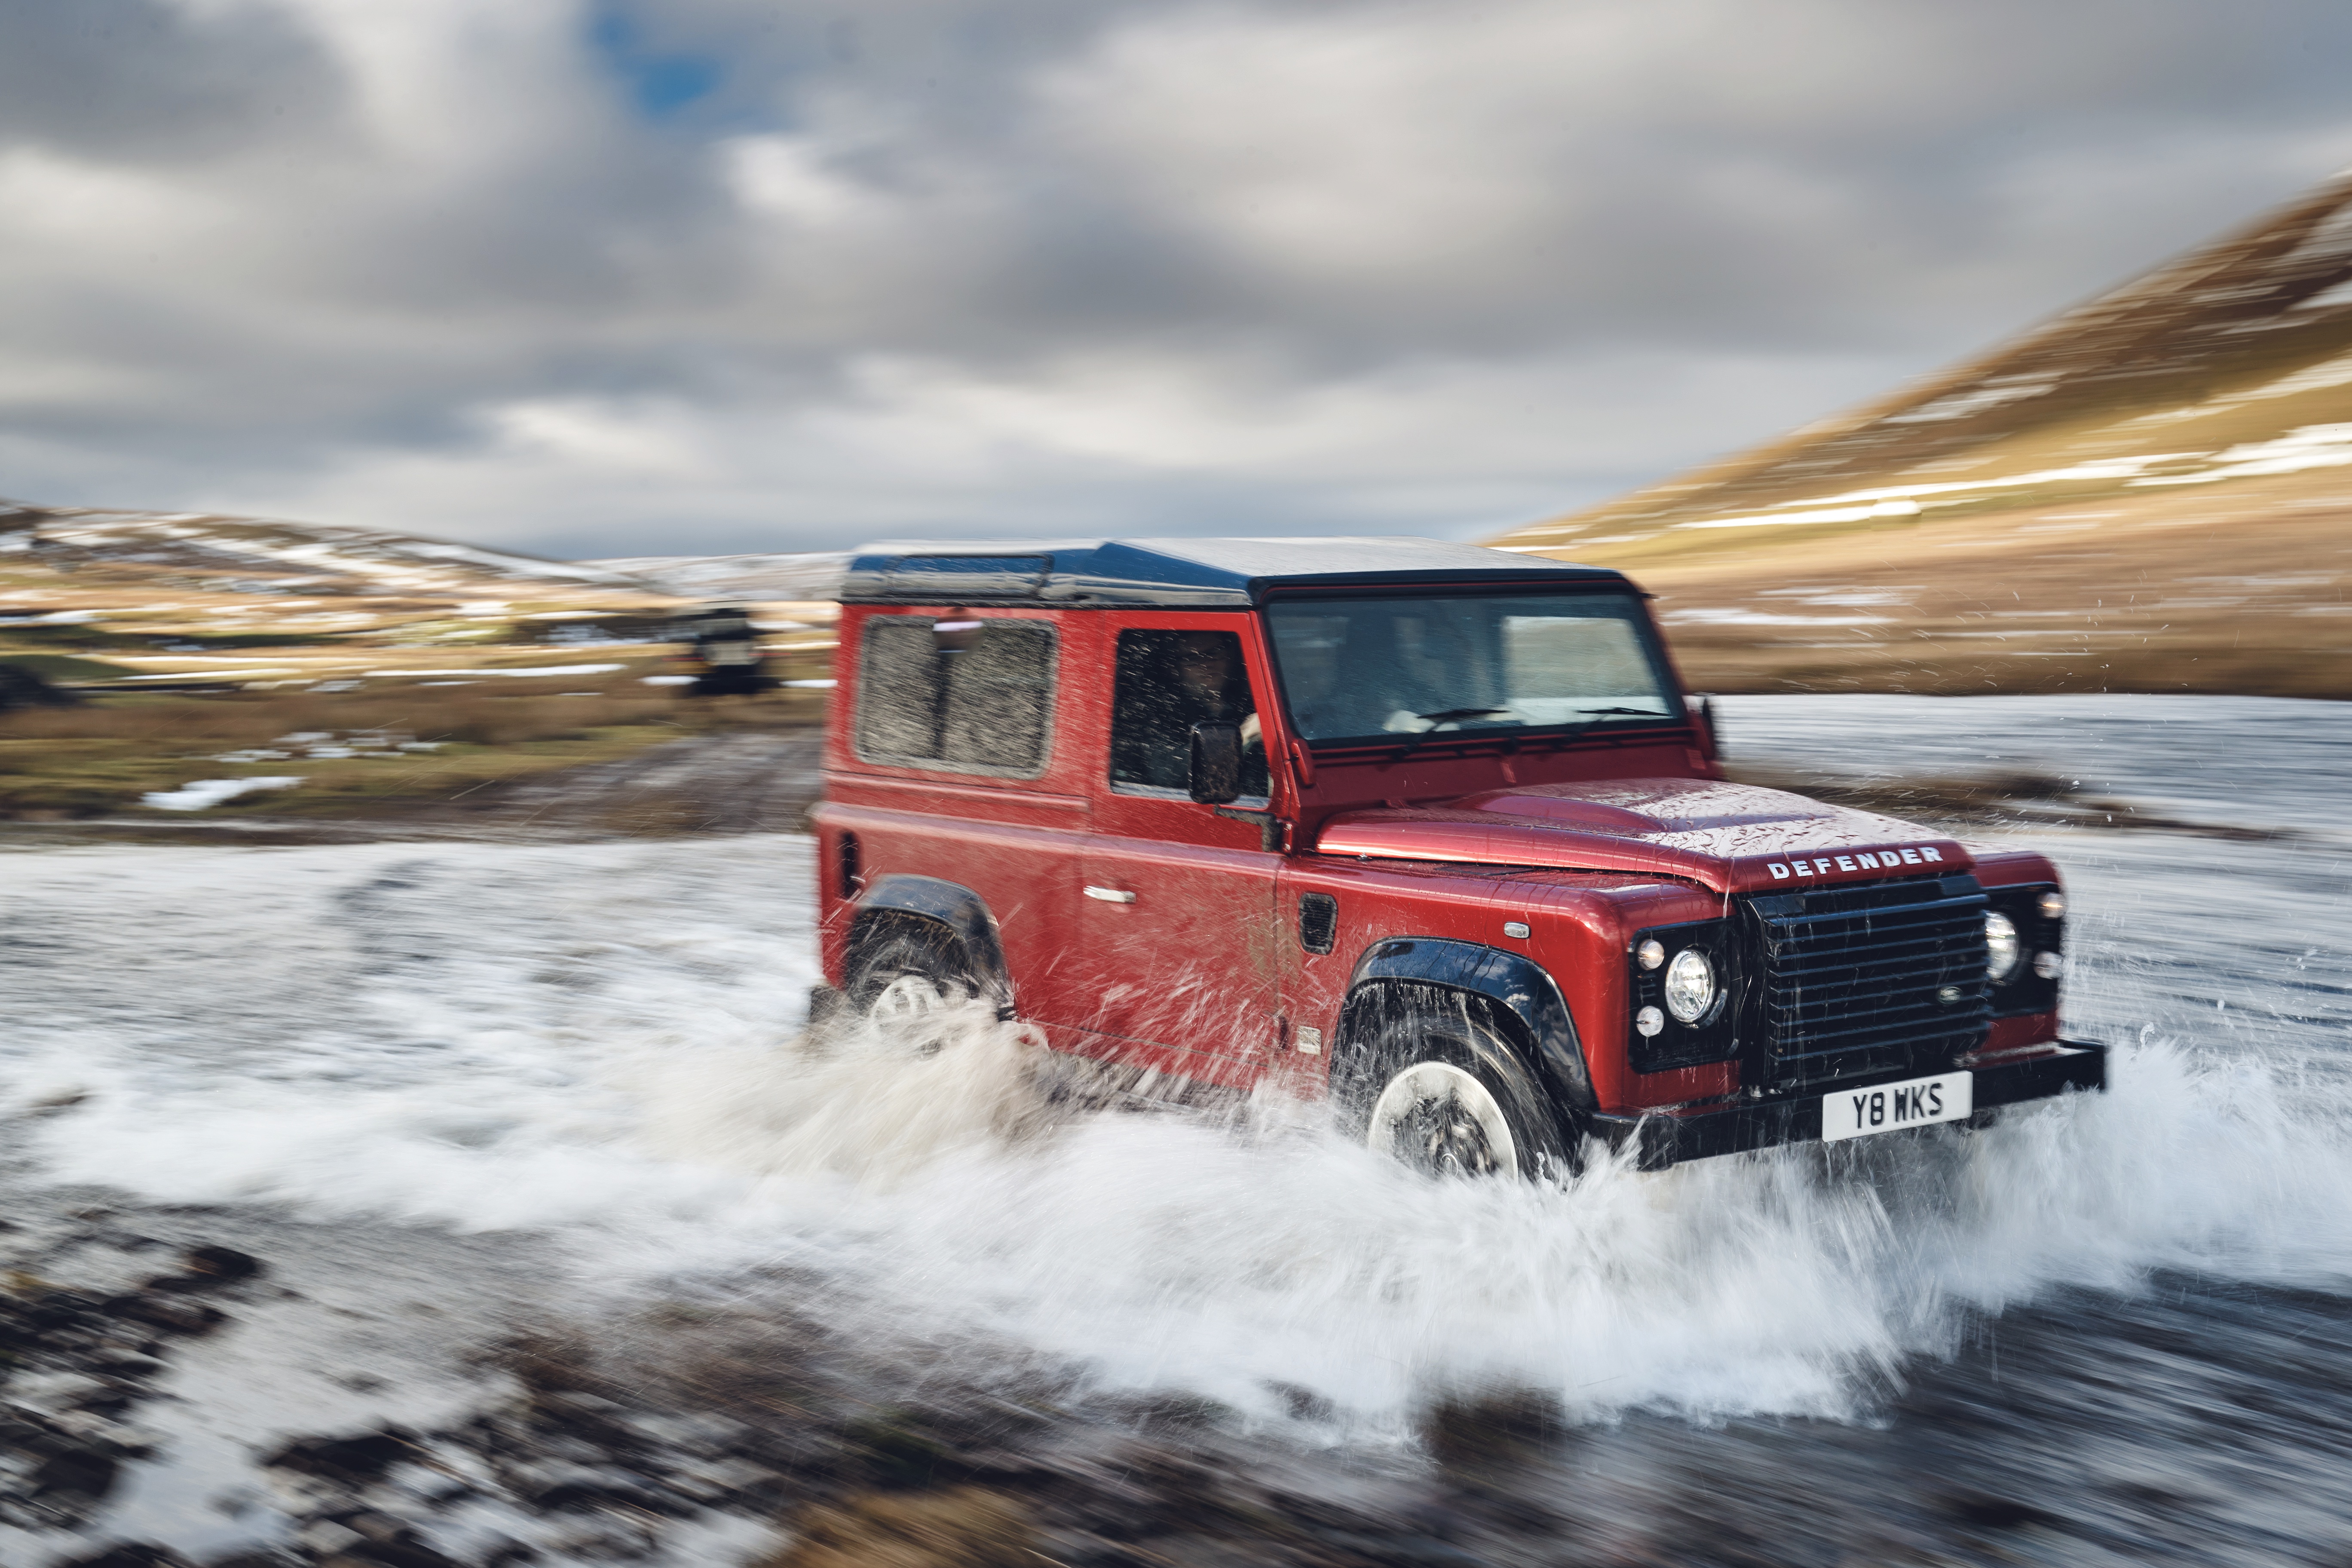 Car Land Rover Land Rover Defender Motion Blur Off Road Red Car River Vehicle 5472x3648